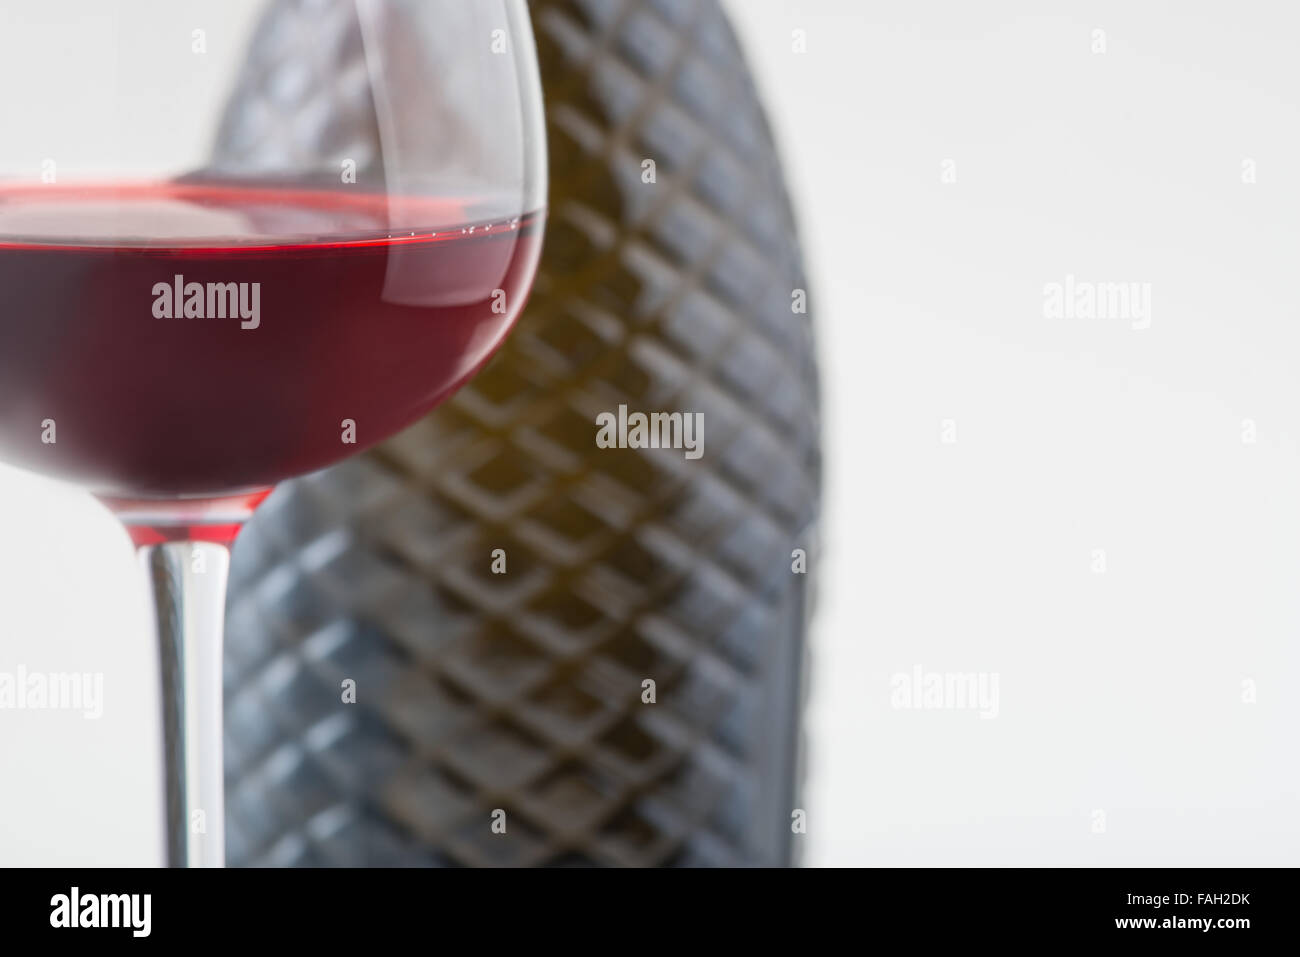 Glass with red wine and bottle behind it. Stock Photo